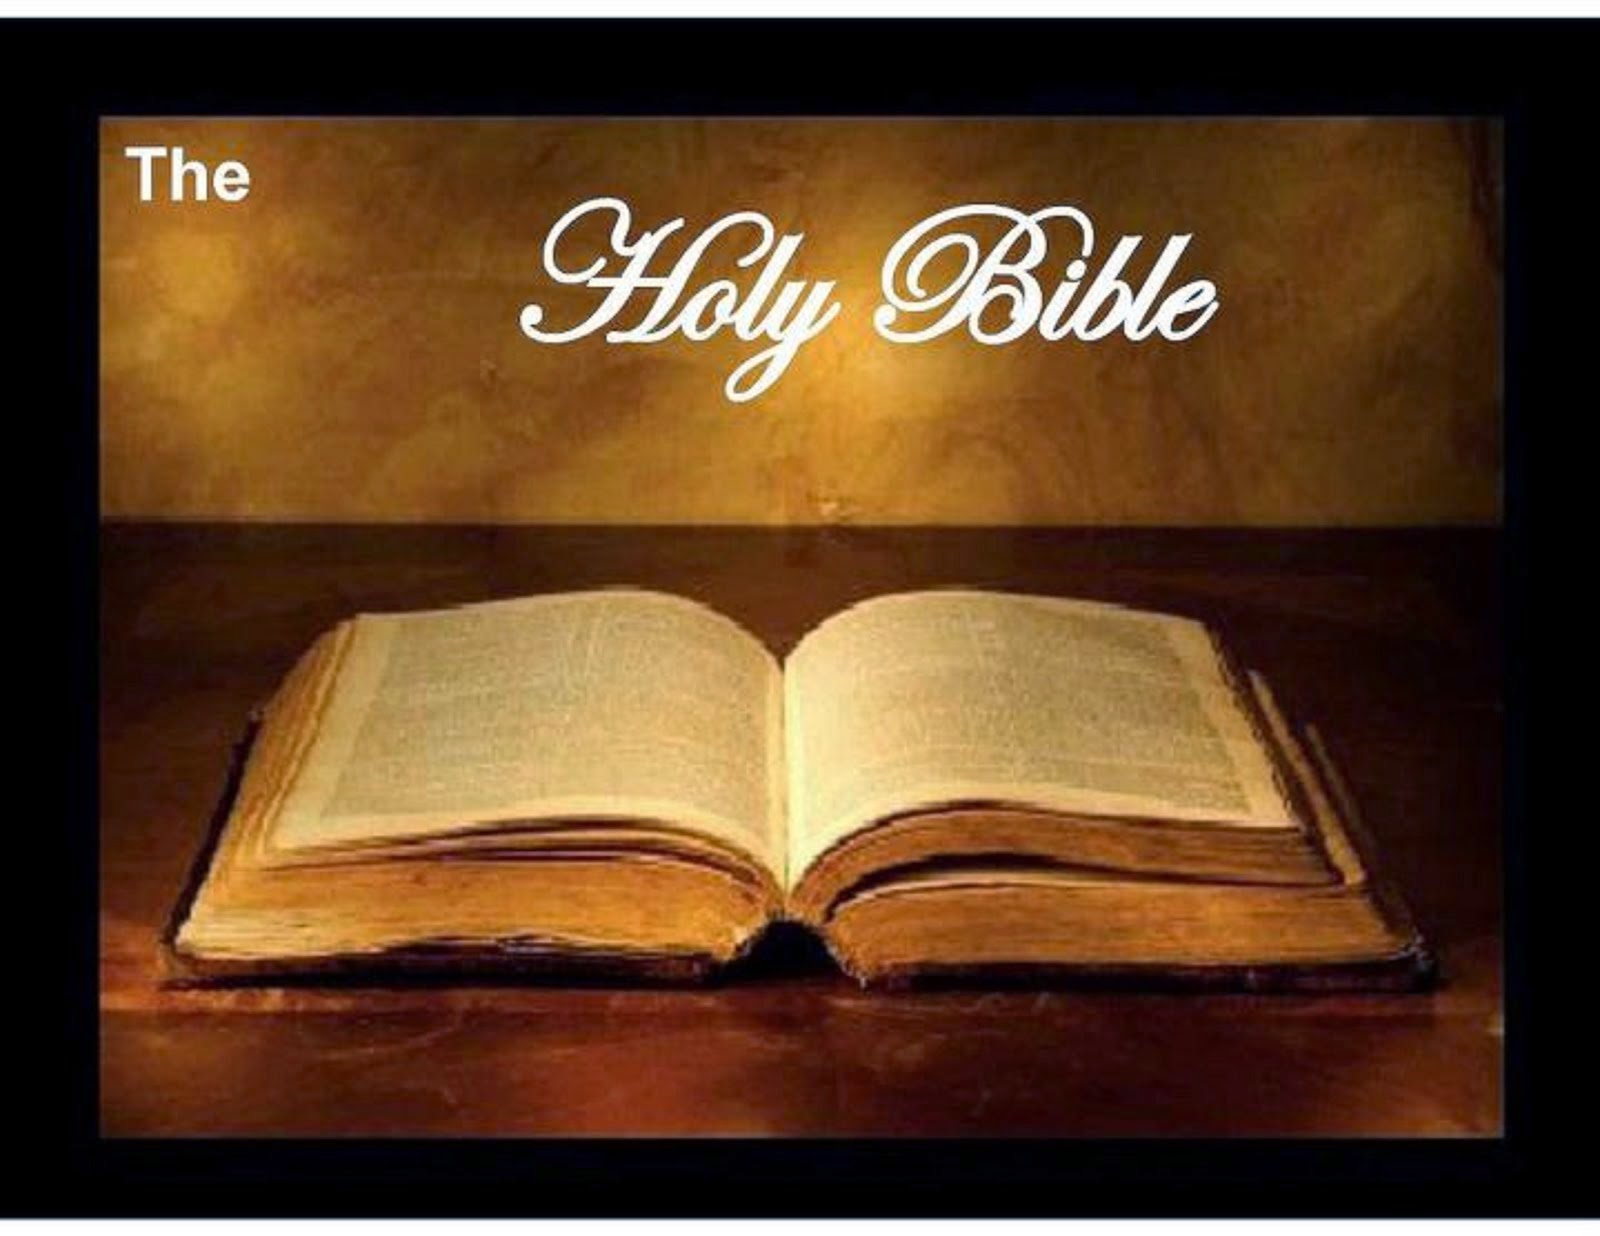 The Bible: A Book Review